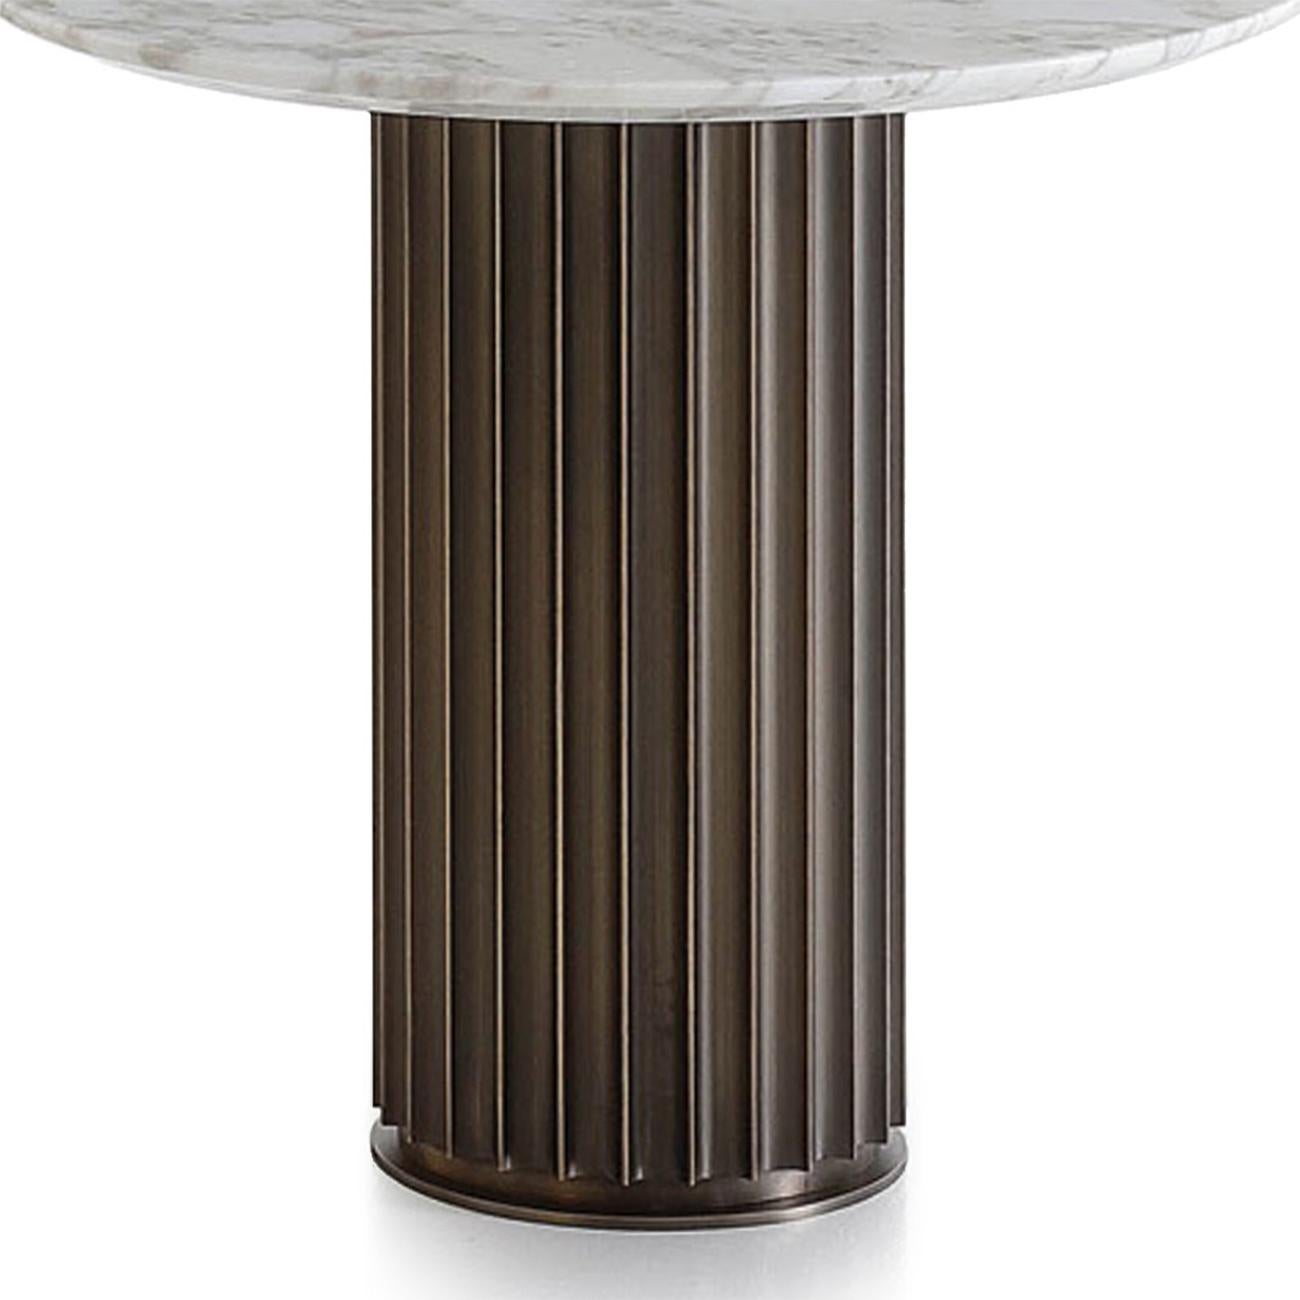 Side table colisee bronze calacatta marble
in diameter 50cm x height 48cm, price: 4150,00€. 
Also available in diameter 60cm x height 48cm, price: 4350,00€.
Also available with solid bronze base with emperador marble round top. 
Measures: